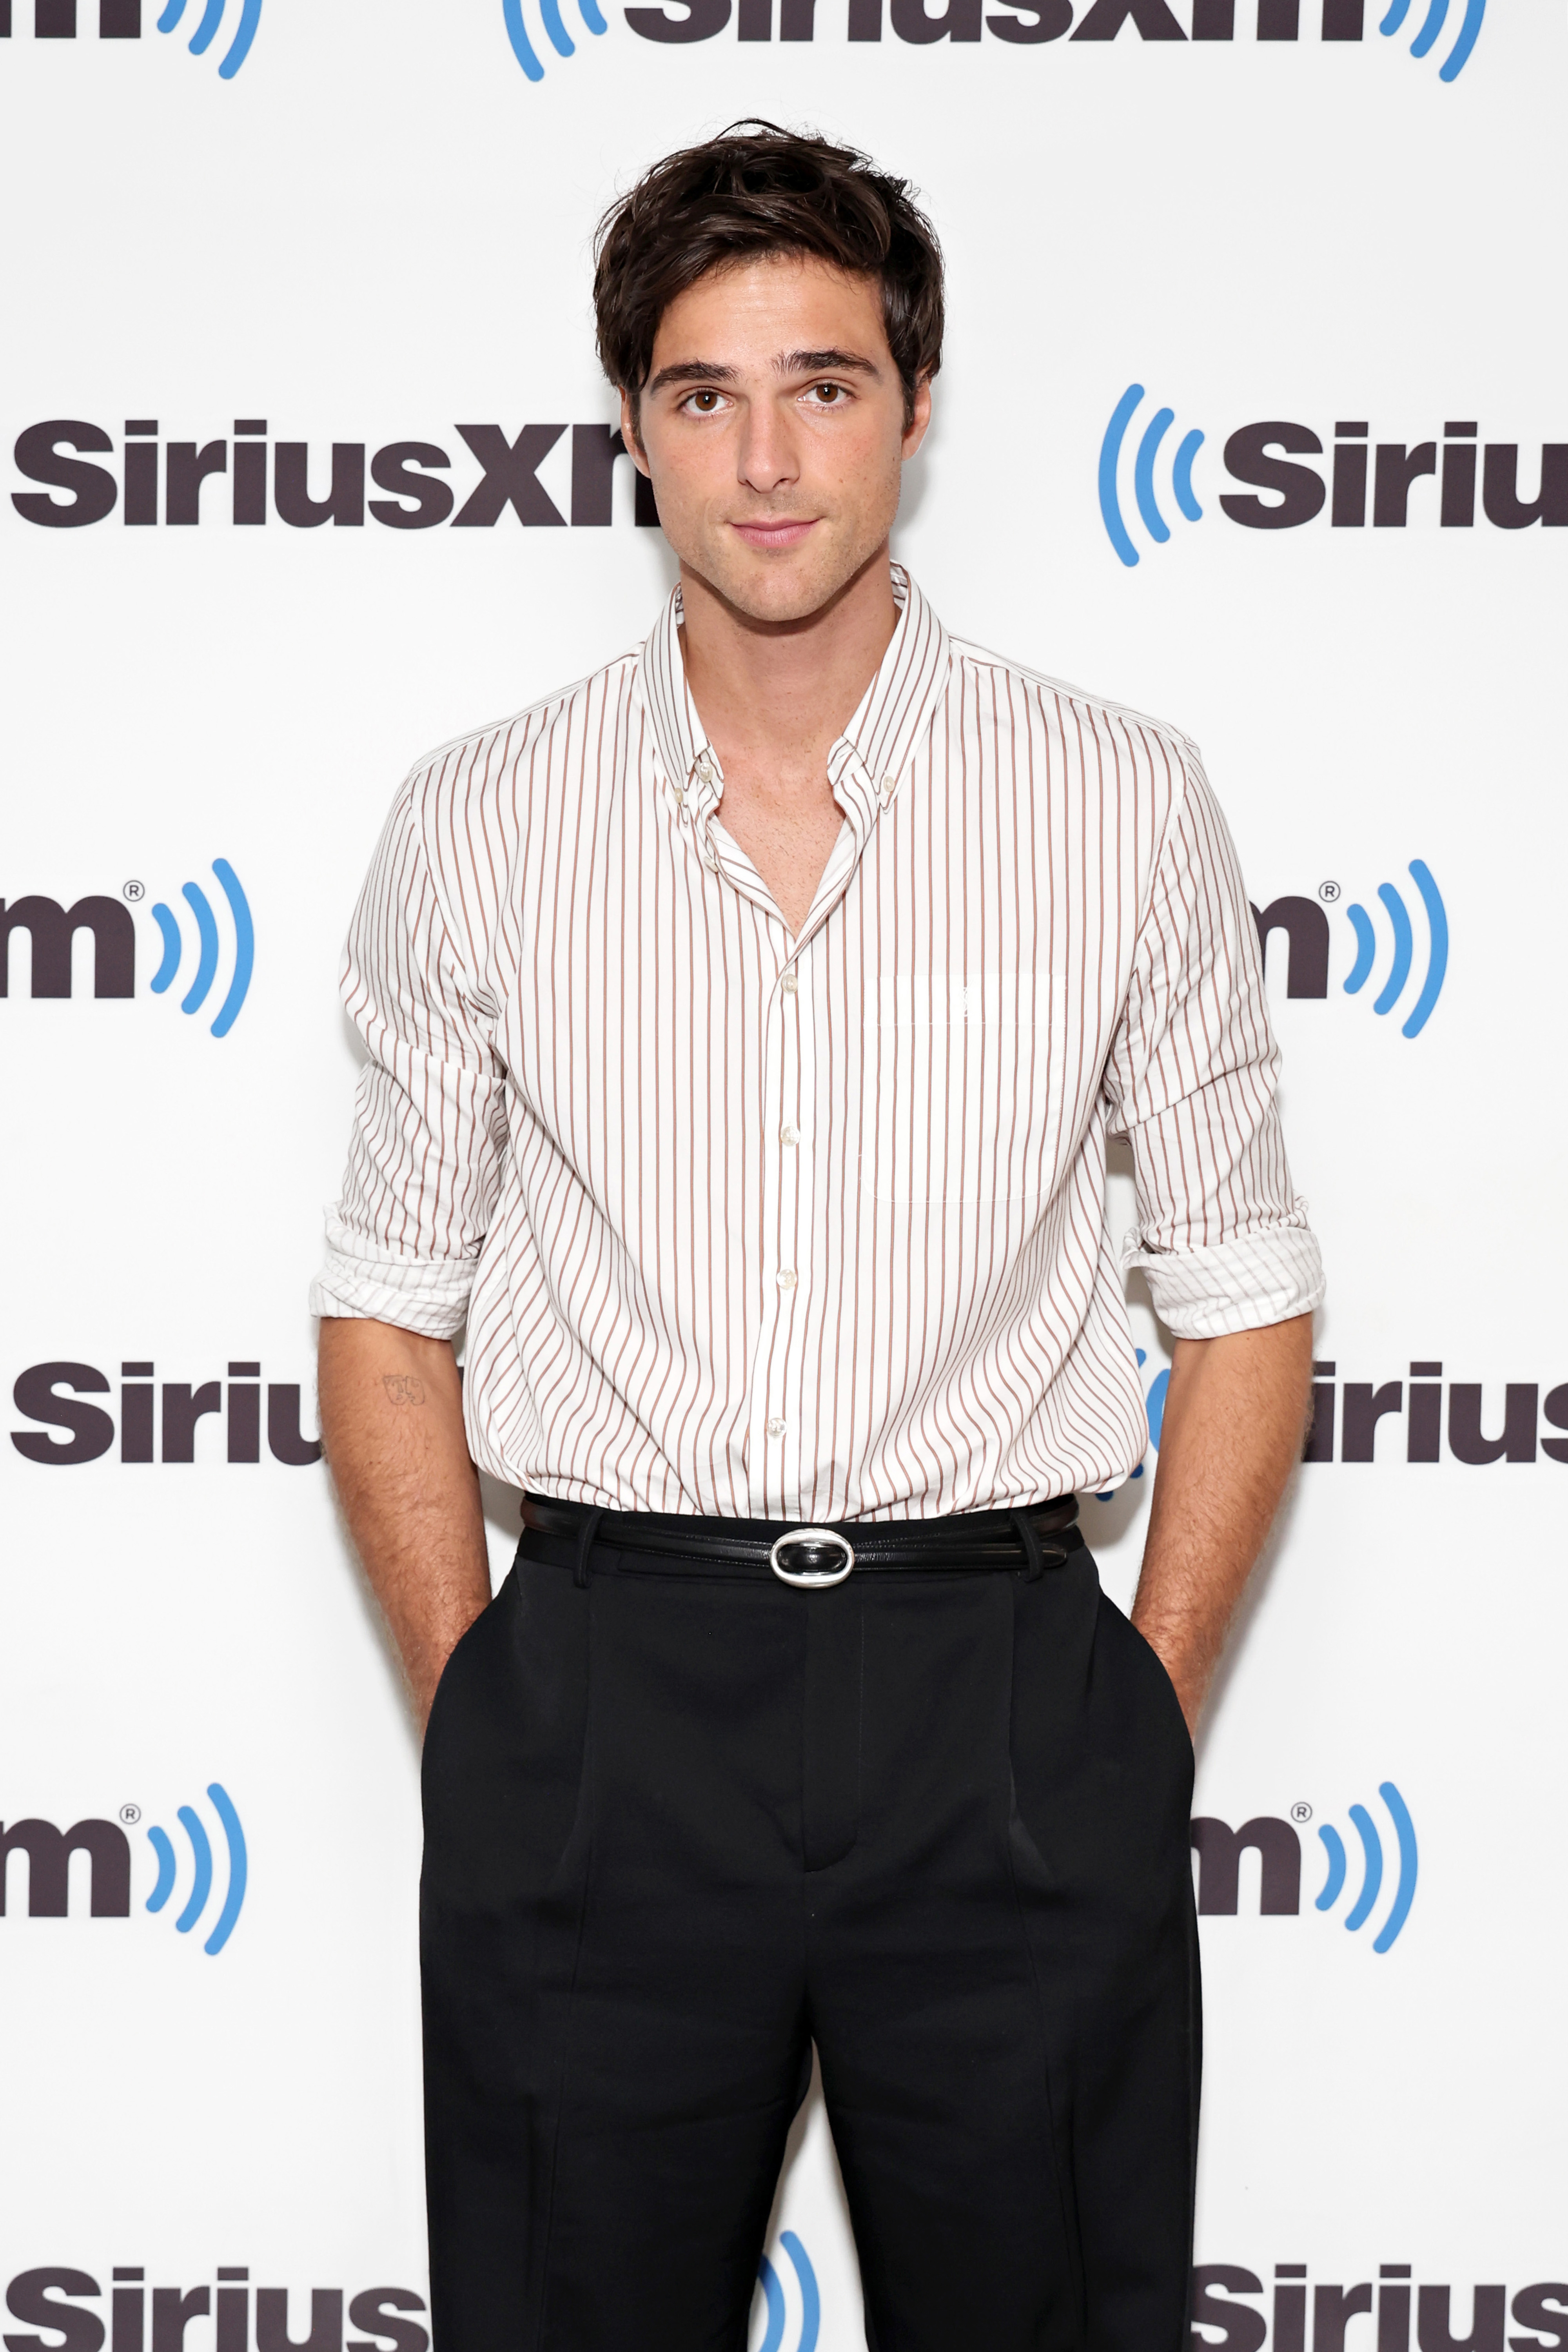 Closeup of Jacob Elordi on the red carpet in a dress shirt and slacks